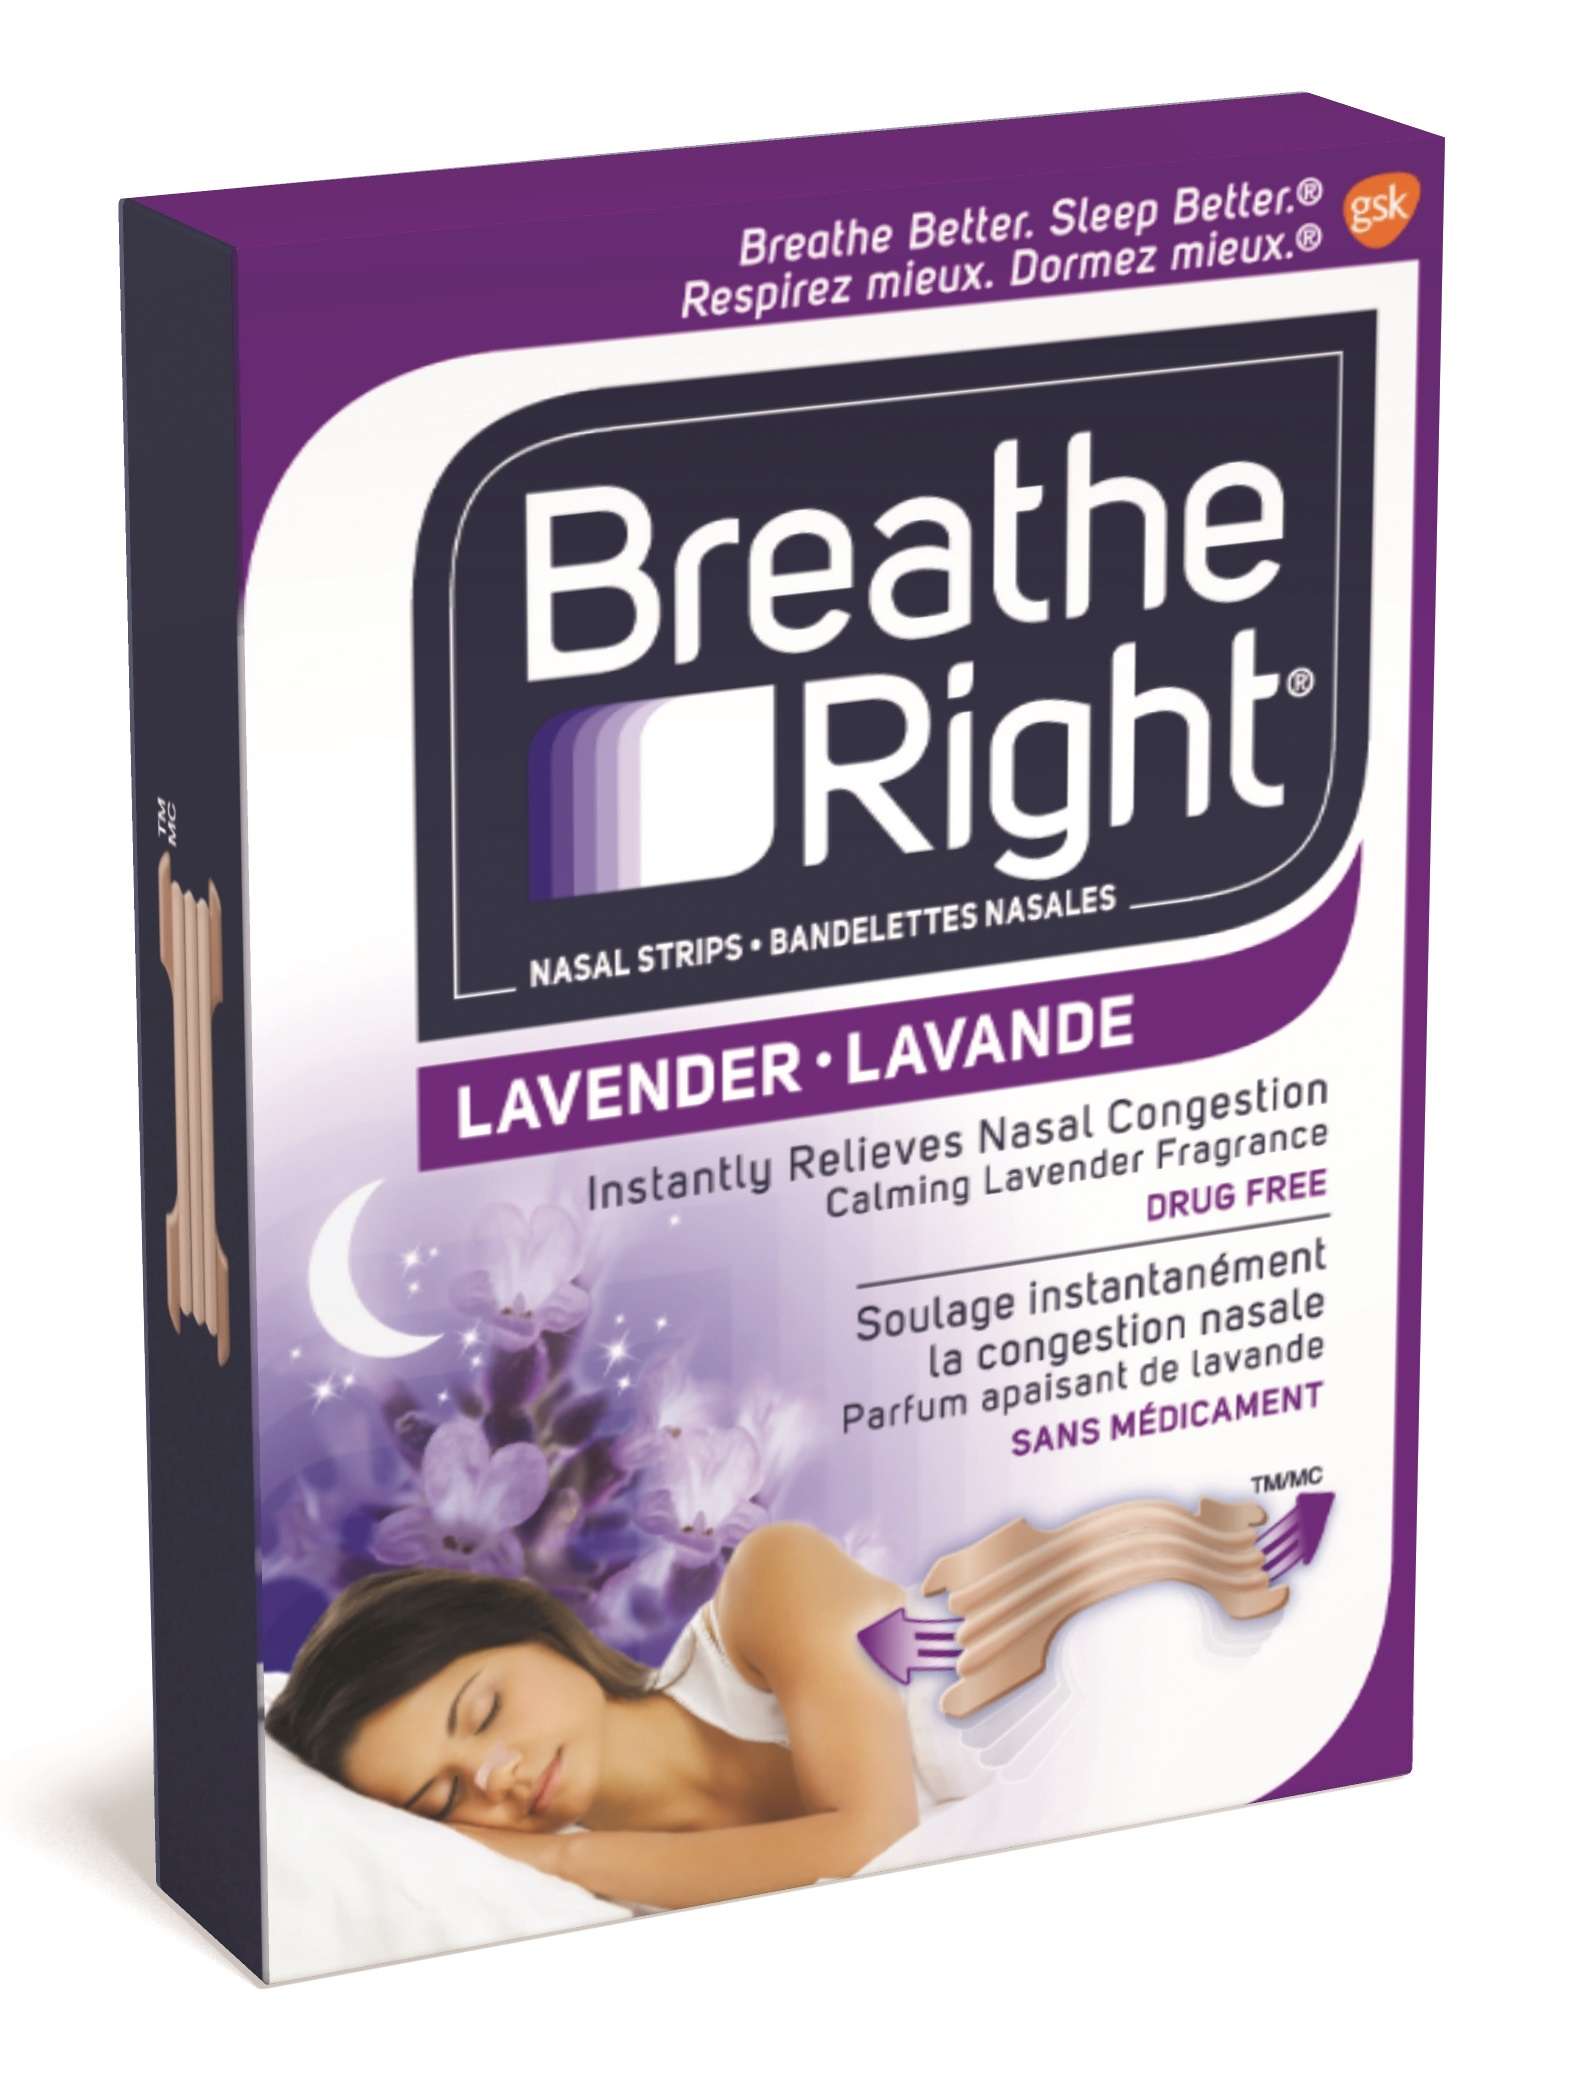 Breathe Right strips relieve nighttime nasal congestion